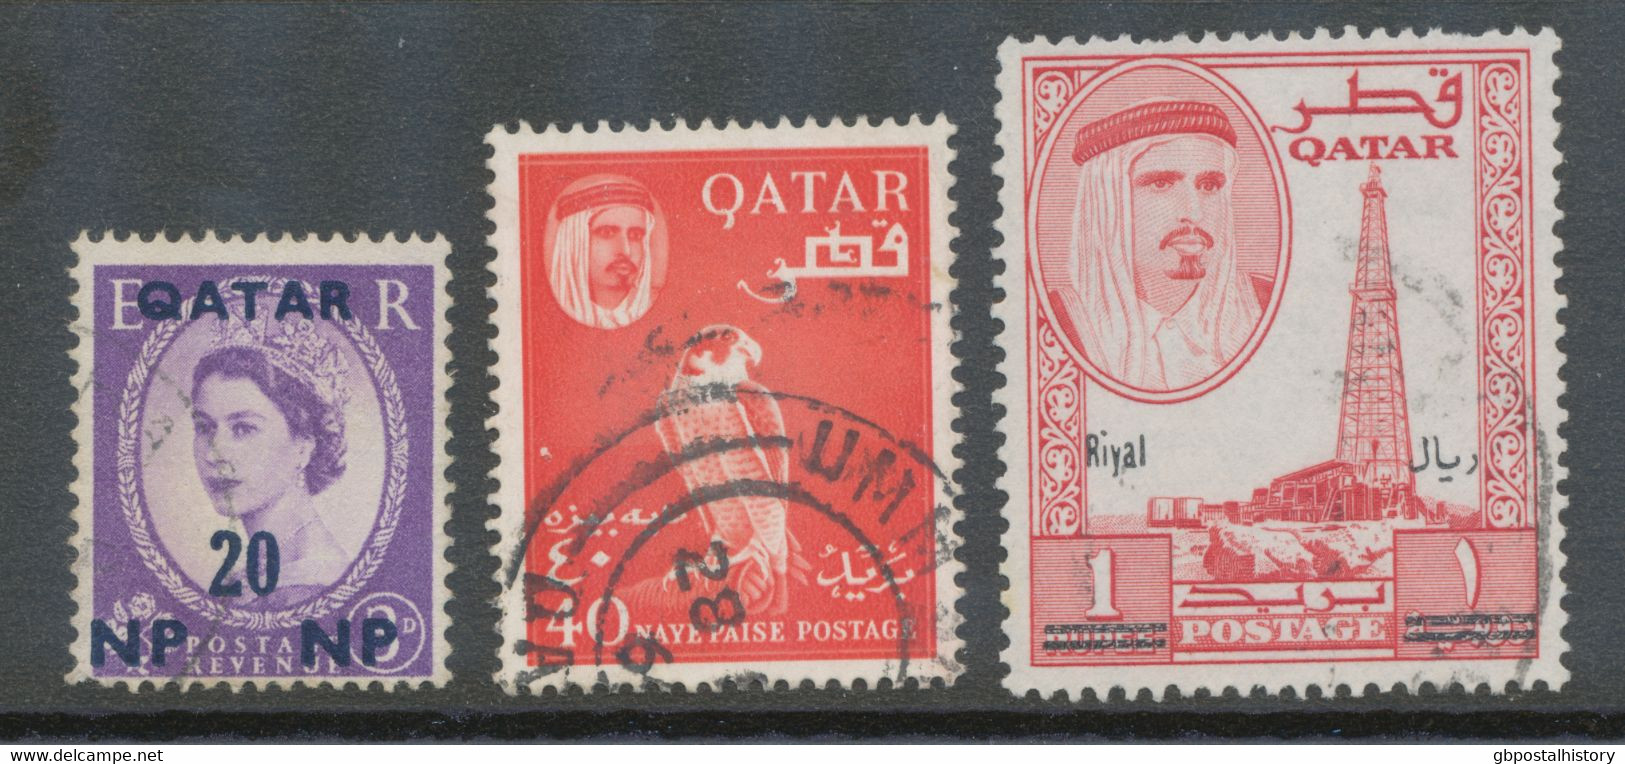 QATAR 1957/66 3 Different Superb Used Stamps As Well Peregrine Falcon And Rare Provisory Issue 1 R. On 1 R. Derrick (LP) - Qatar